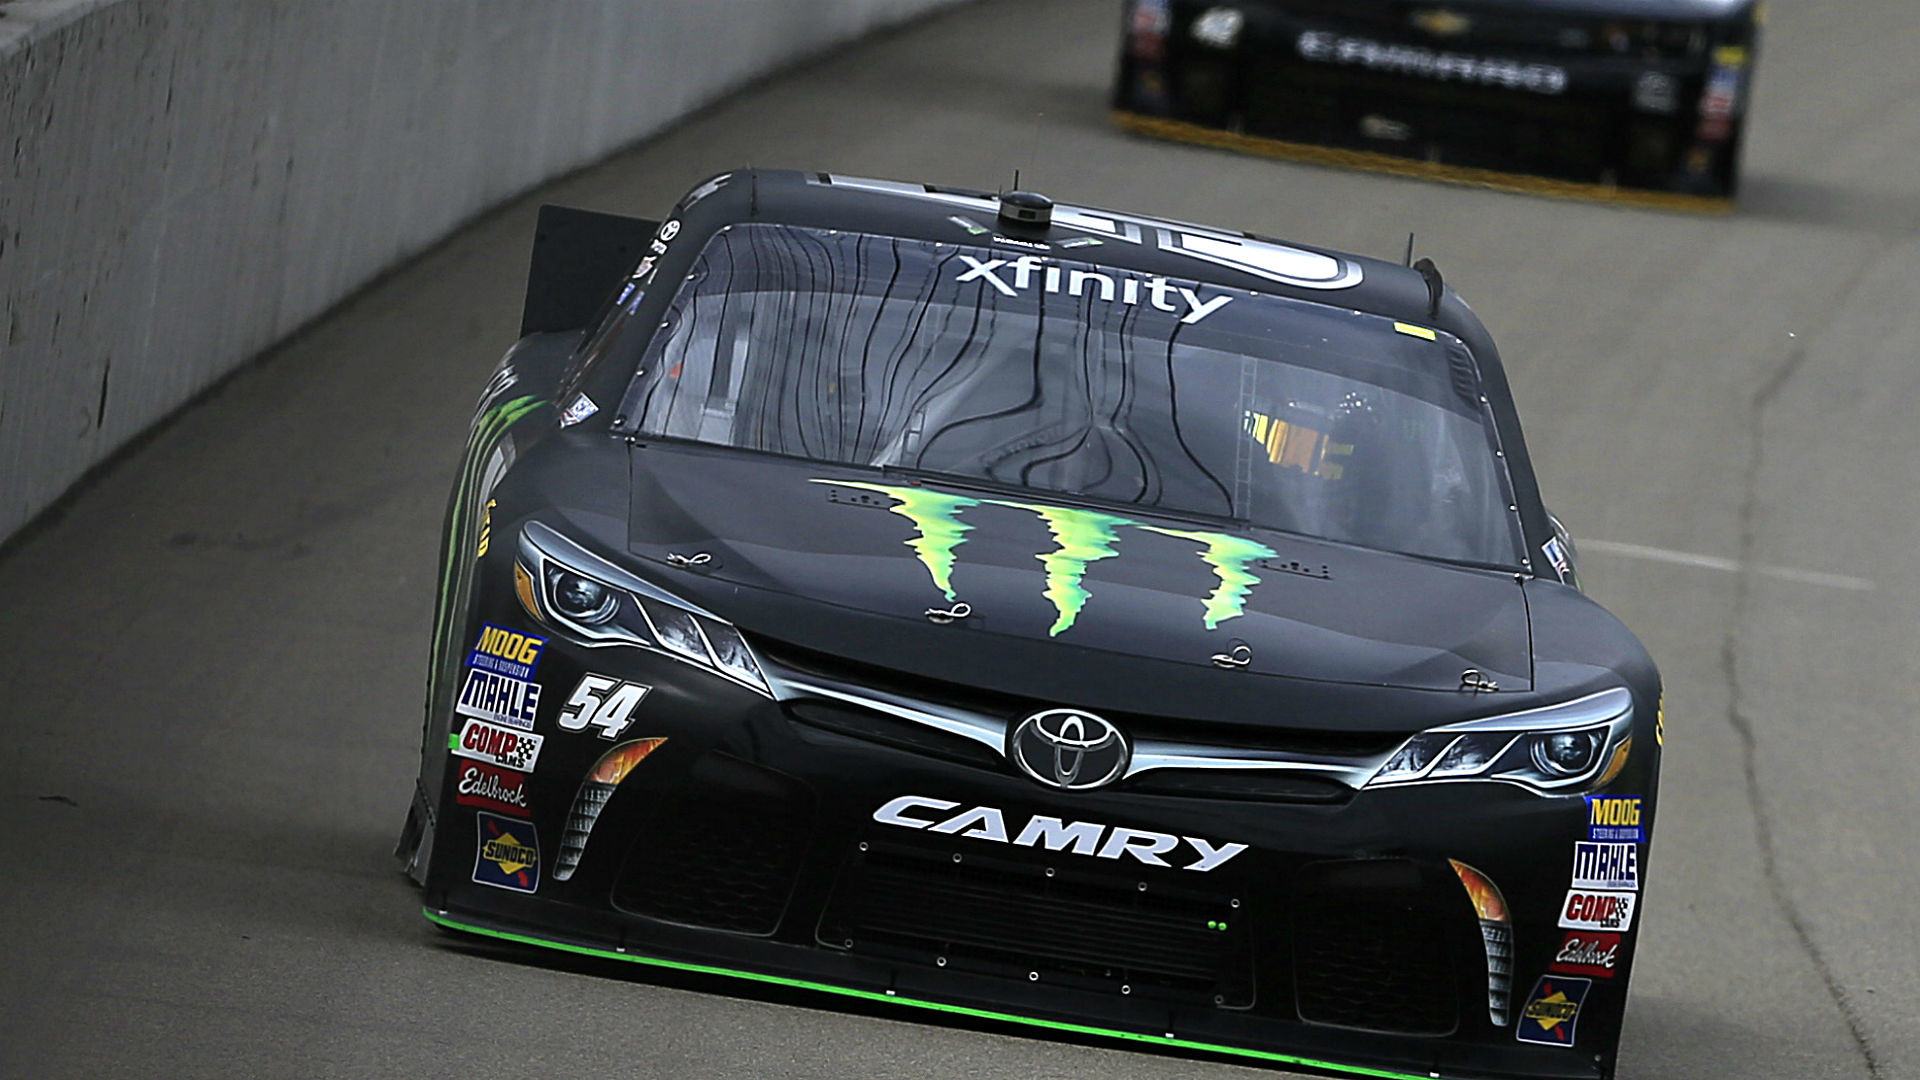 1920x1080 Xfinity results: Kyle Busch makes overtime pass to win at Bristol | NASCAR  | Sporting News